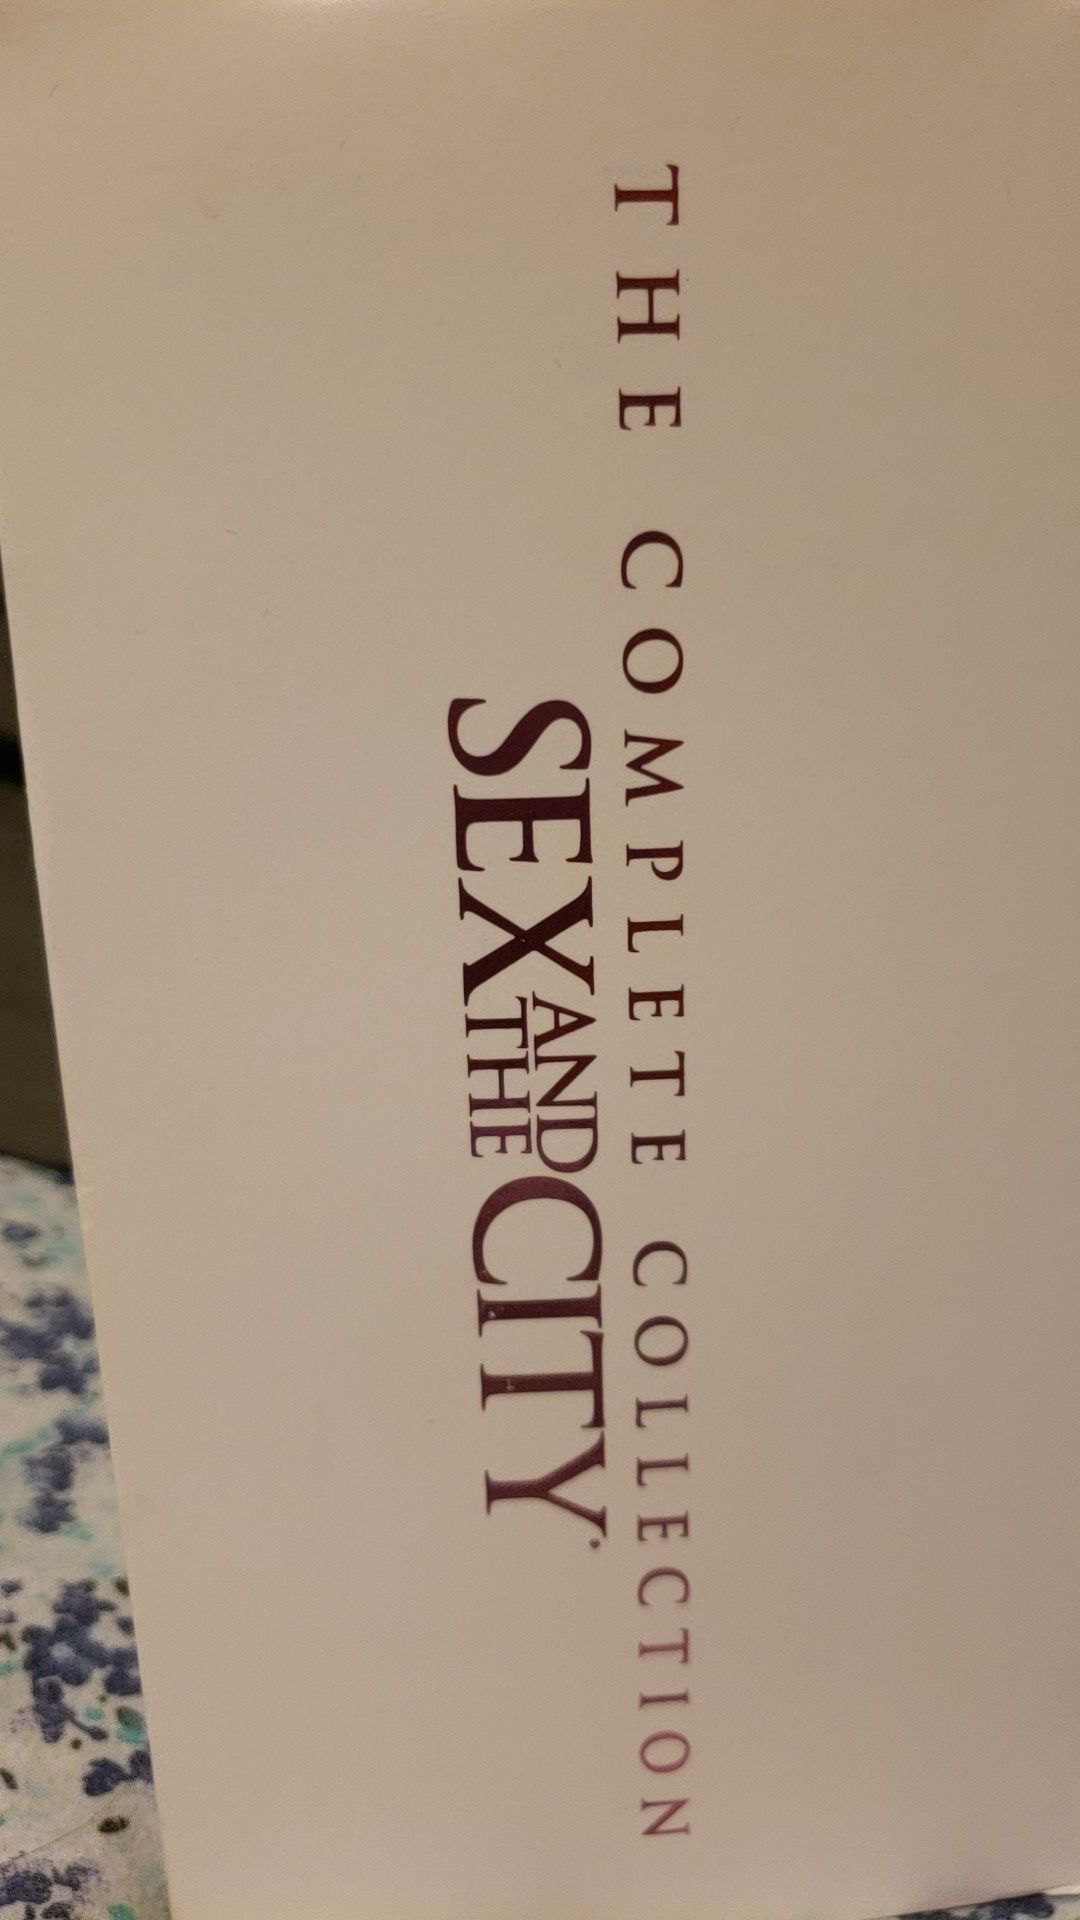 Sex and the city DVDs